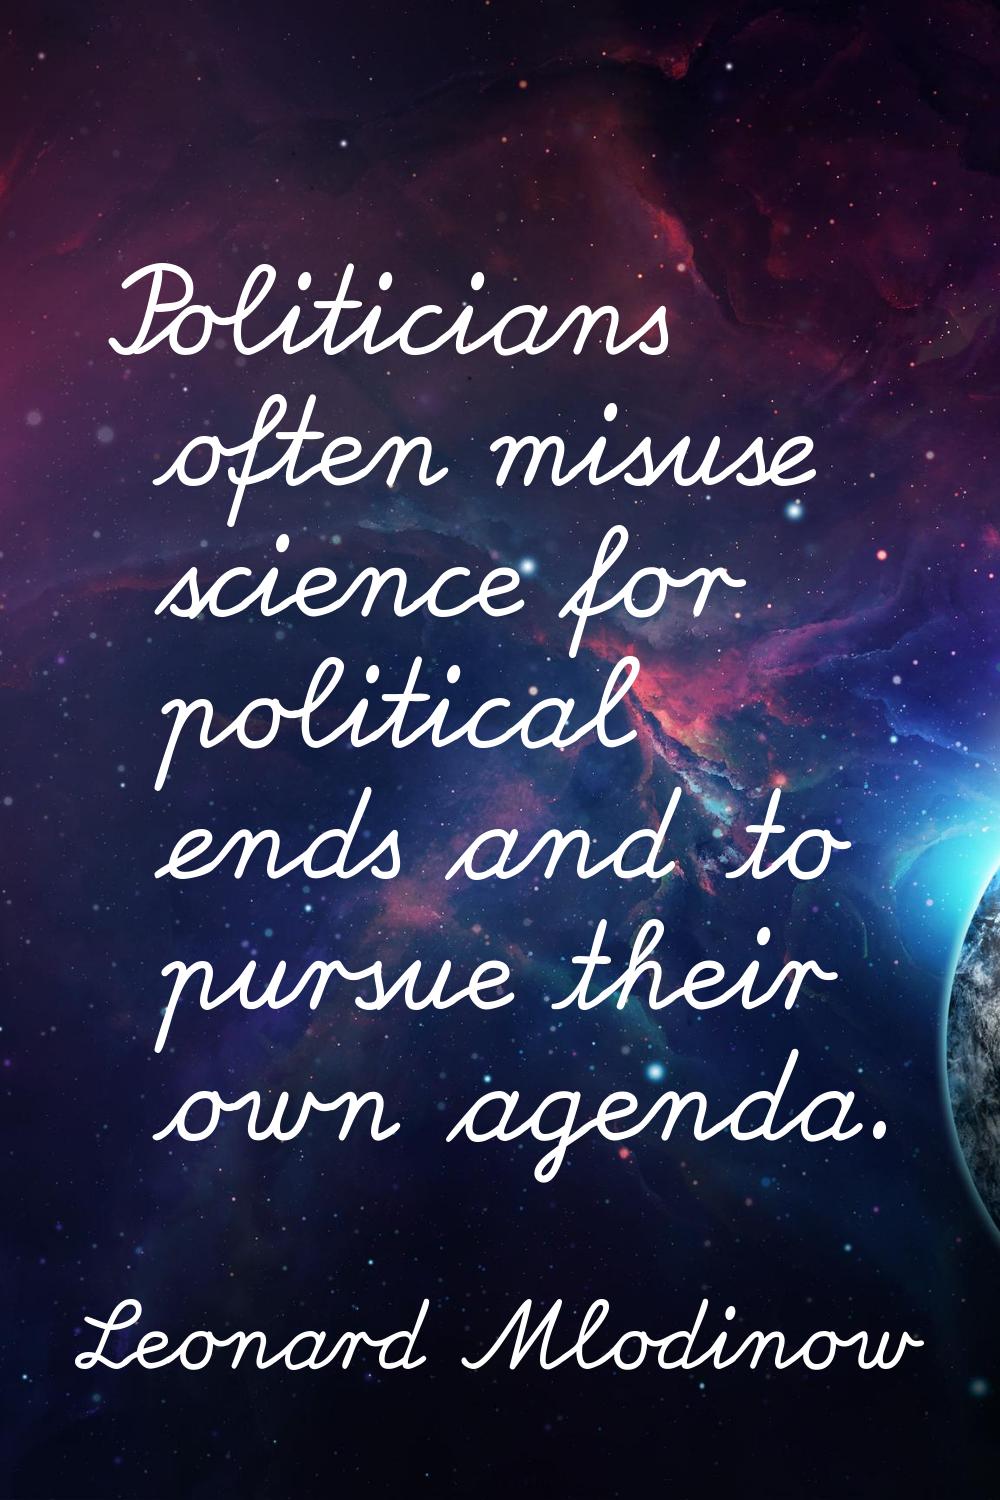 Politicians often misuse science for political ends and to pursue their own agenda.